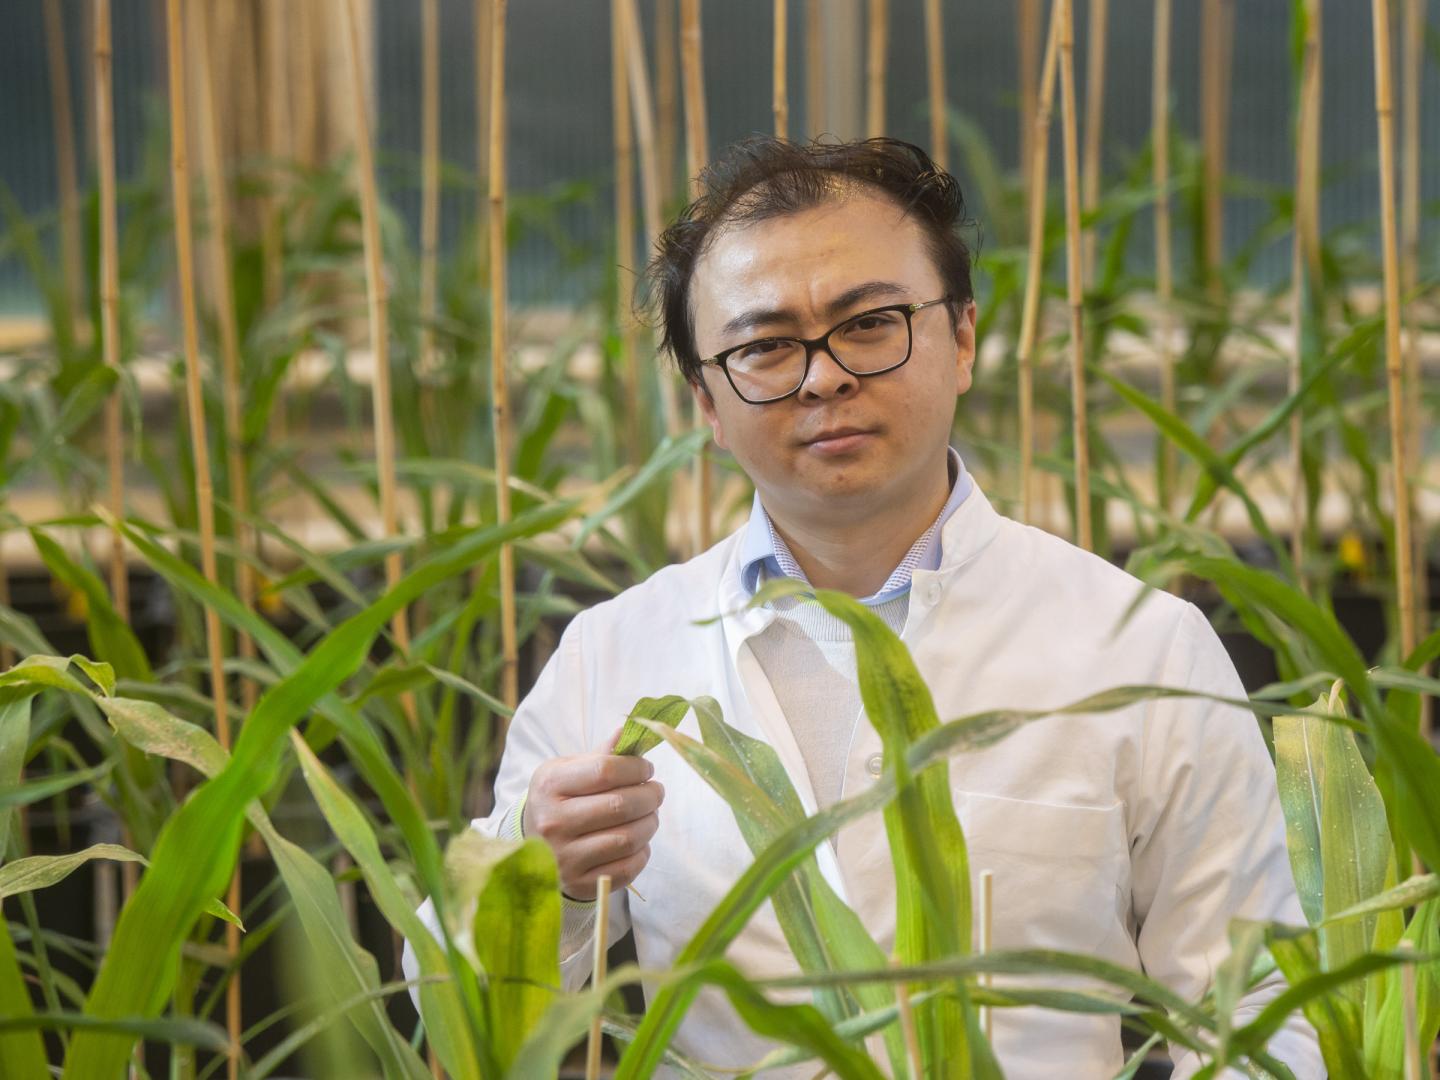 Amid young Maize plants: Dr. Peng Yu from the Institute of Crop Sciences and Resource Conservation (INRES) at the University of Bonn (Germany). Source: Barbara Frommann/University of Bonn